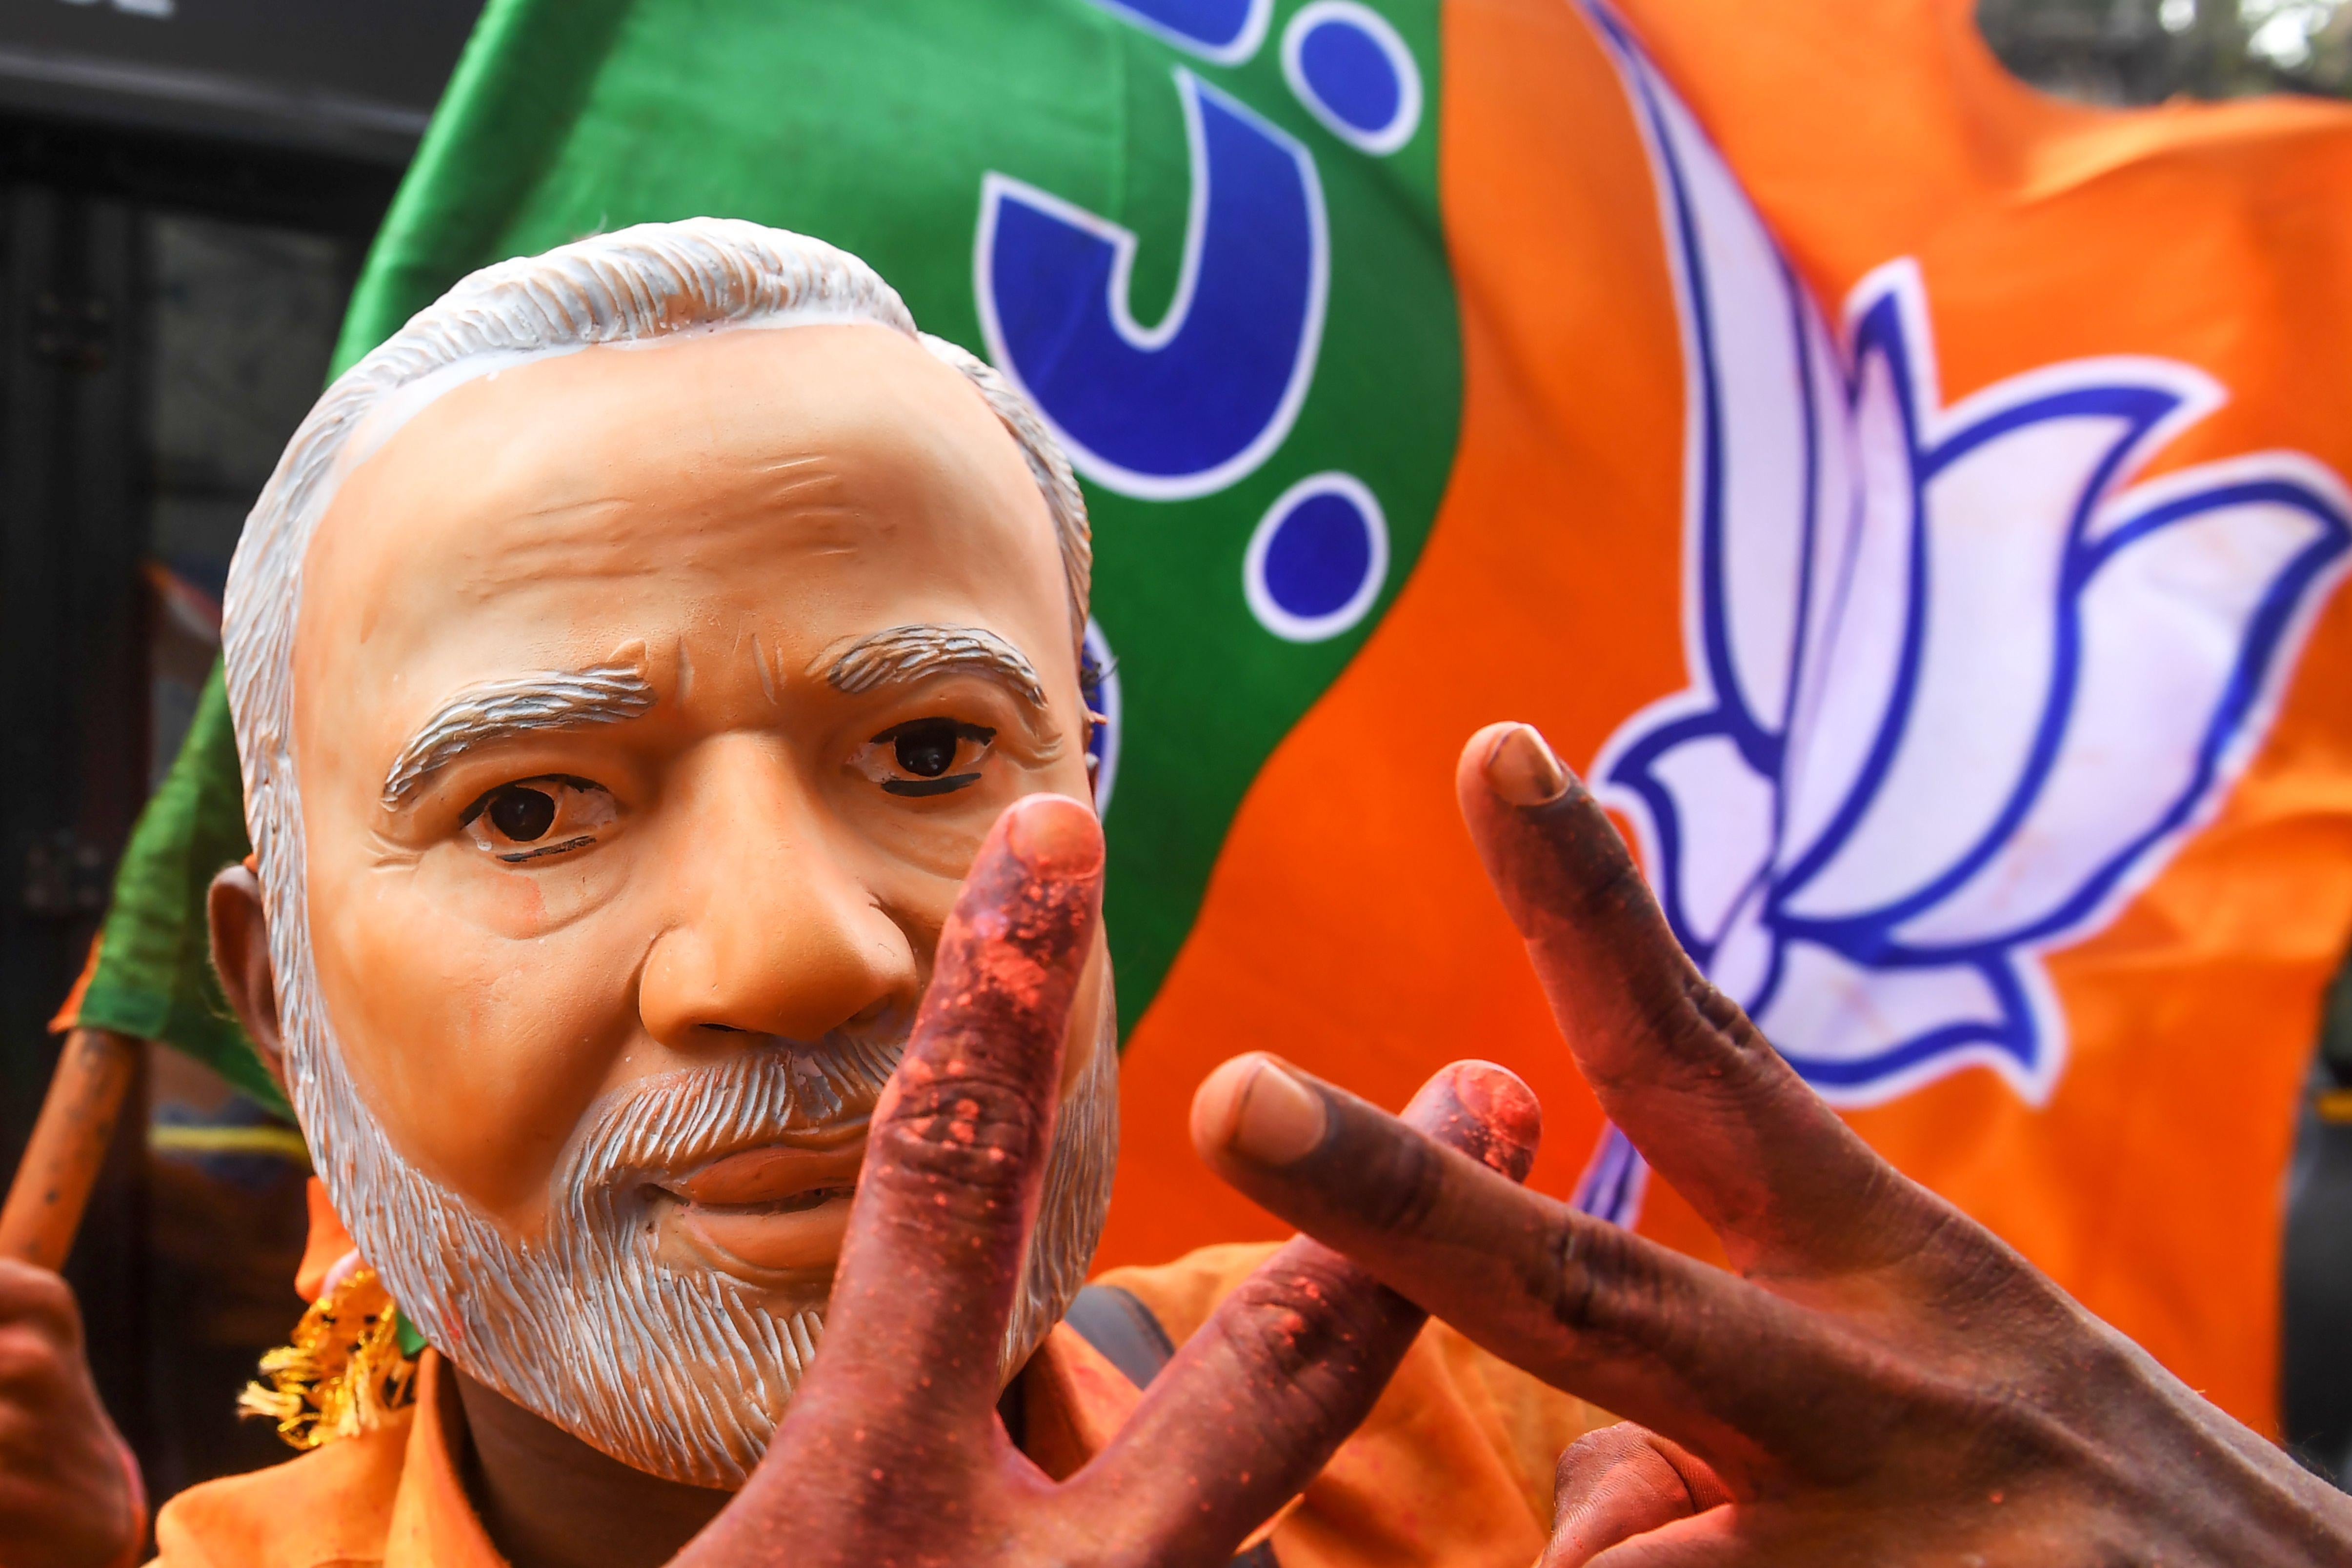 An Indian supporter of Bharatiya Janata Party (BJP) wearing a mask of Prime Minister Narendra Modi flahes the victory sign as he celebrates on the vote results day for India's general election in Kolkata on May 23, 2019.